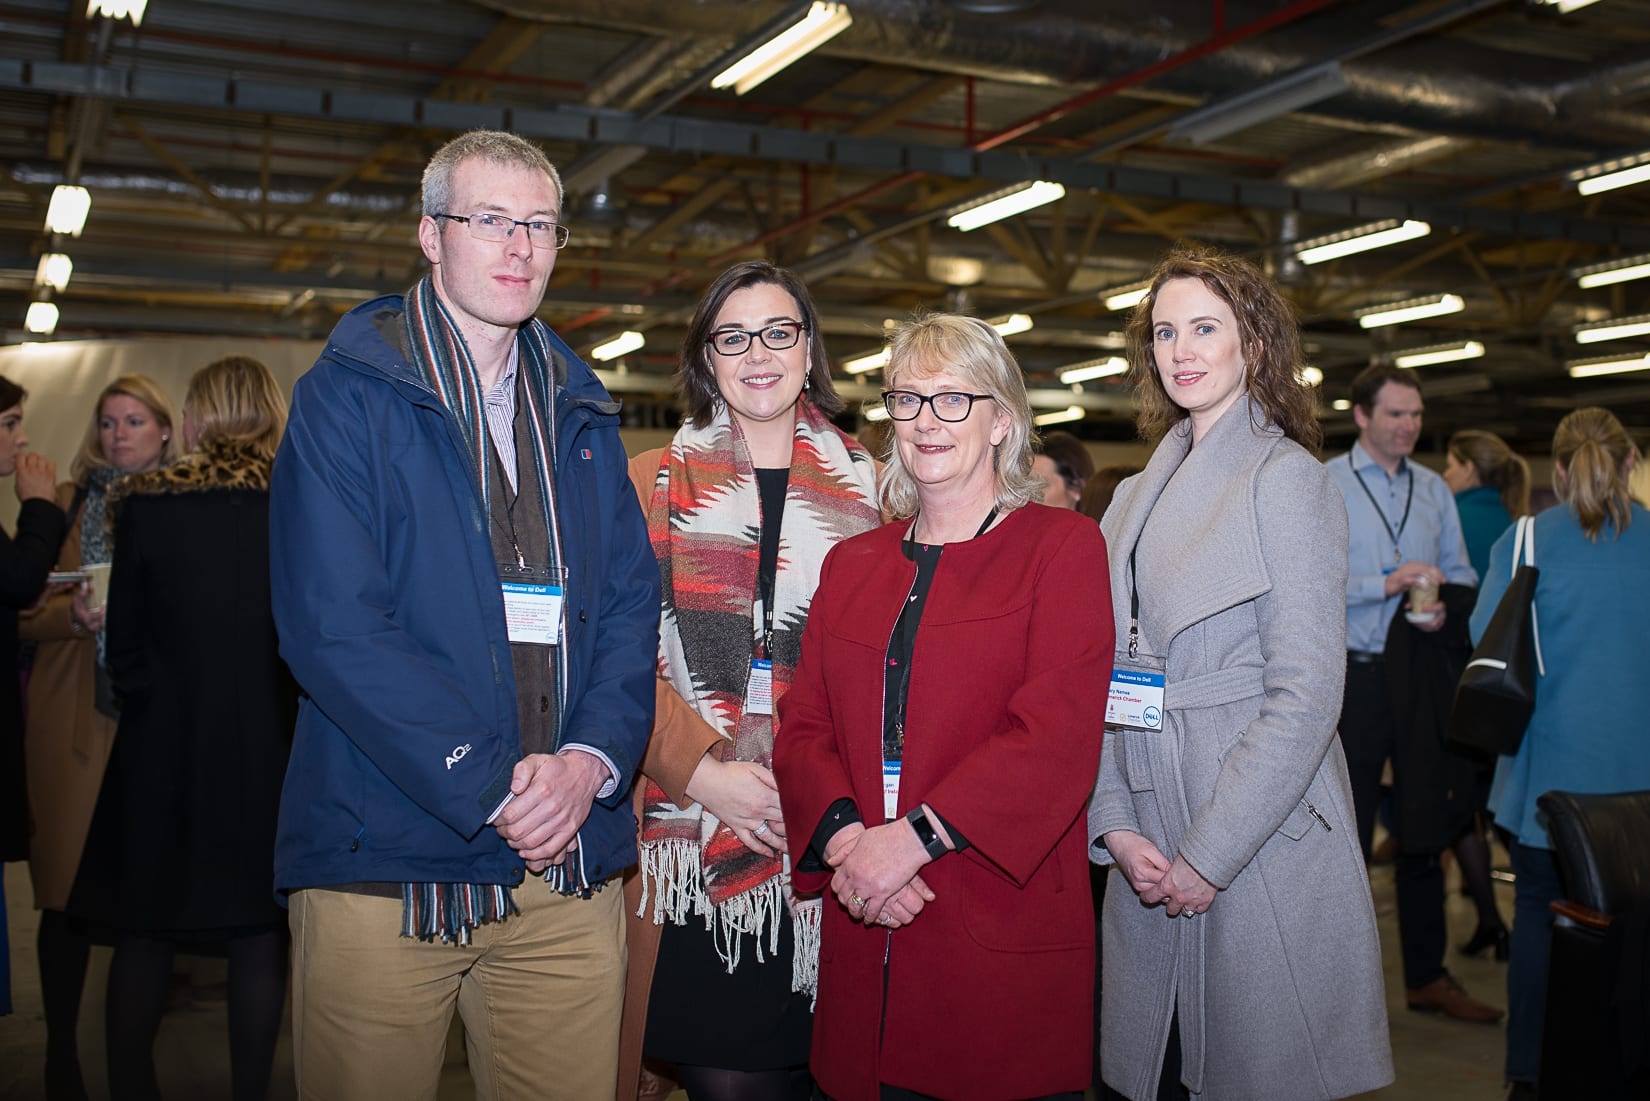 At the Limerick Chamber Regional Leaders programme in Dell, sponsored by Dell EMC, in association with Kemmy Business School UL, was From left to right: Eamonn  Gardiner - Limerick Chamber Skillnet, Ciara Earlie- BOI, Liz Horgan - BOI, Mary McNamee- Limerick Chamber.